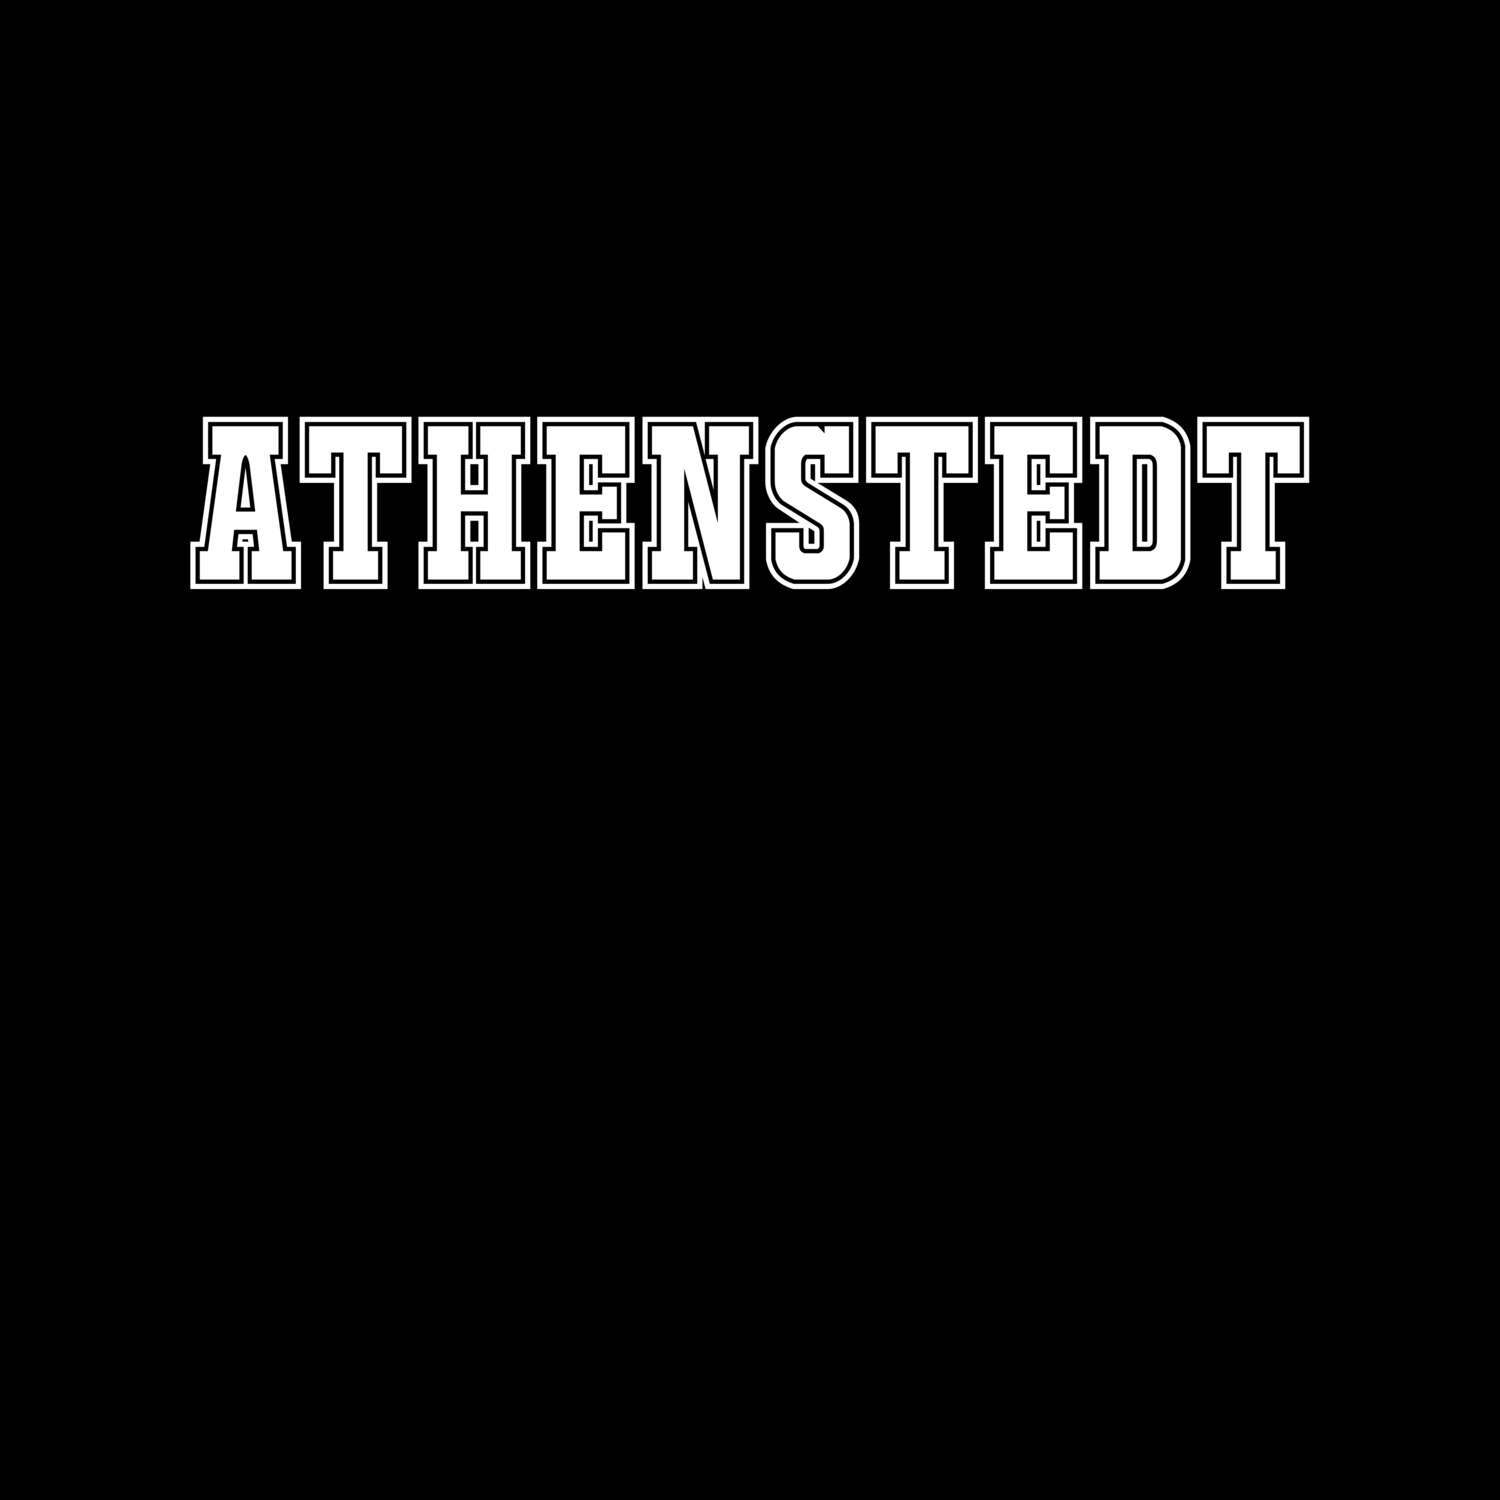 Athenstedt T-Shirt »Classic«